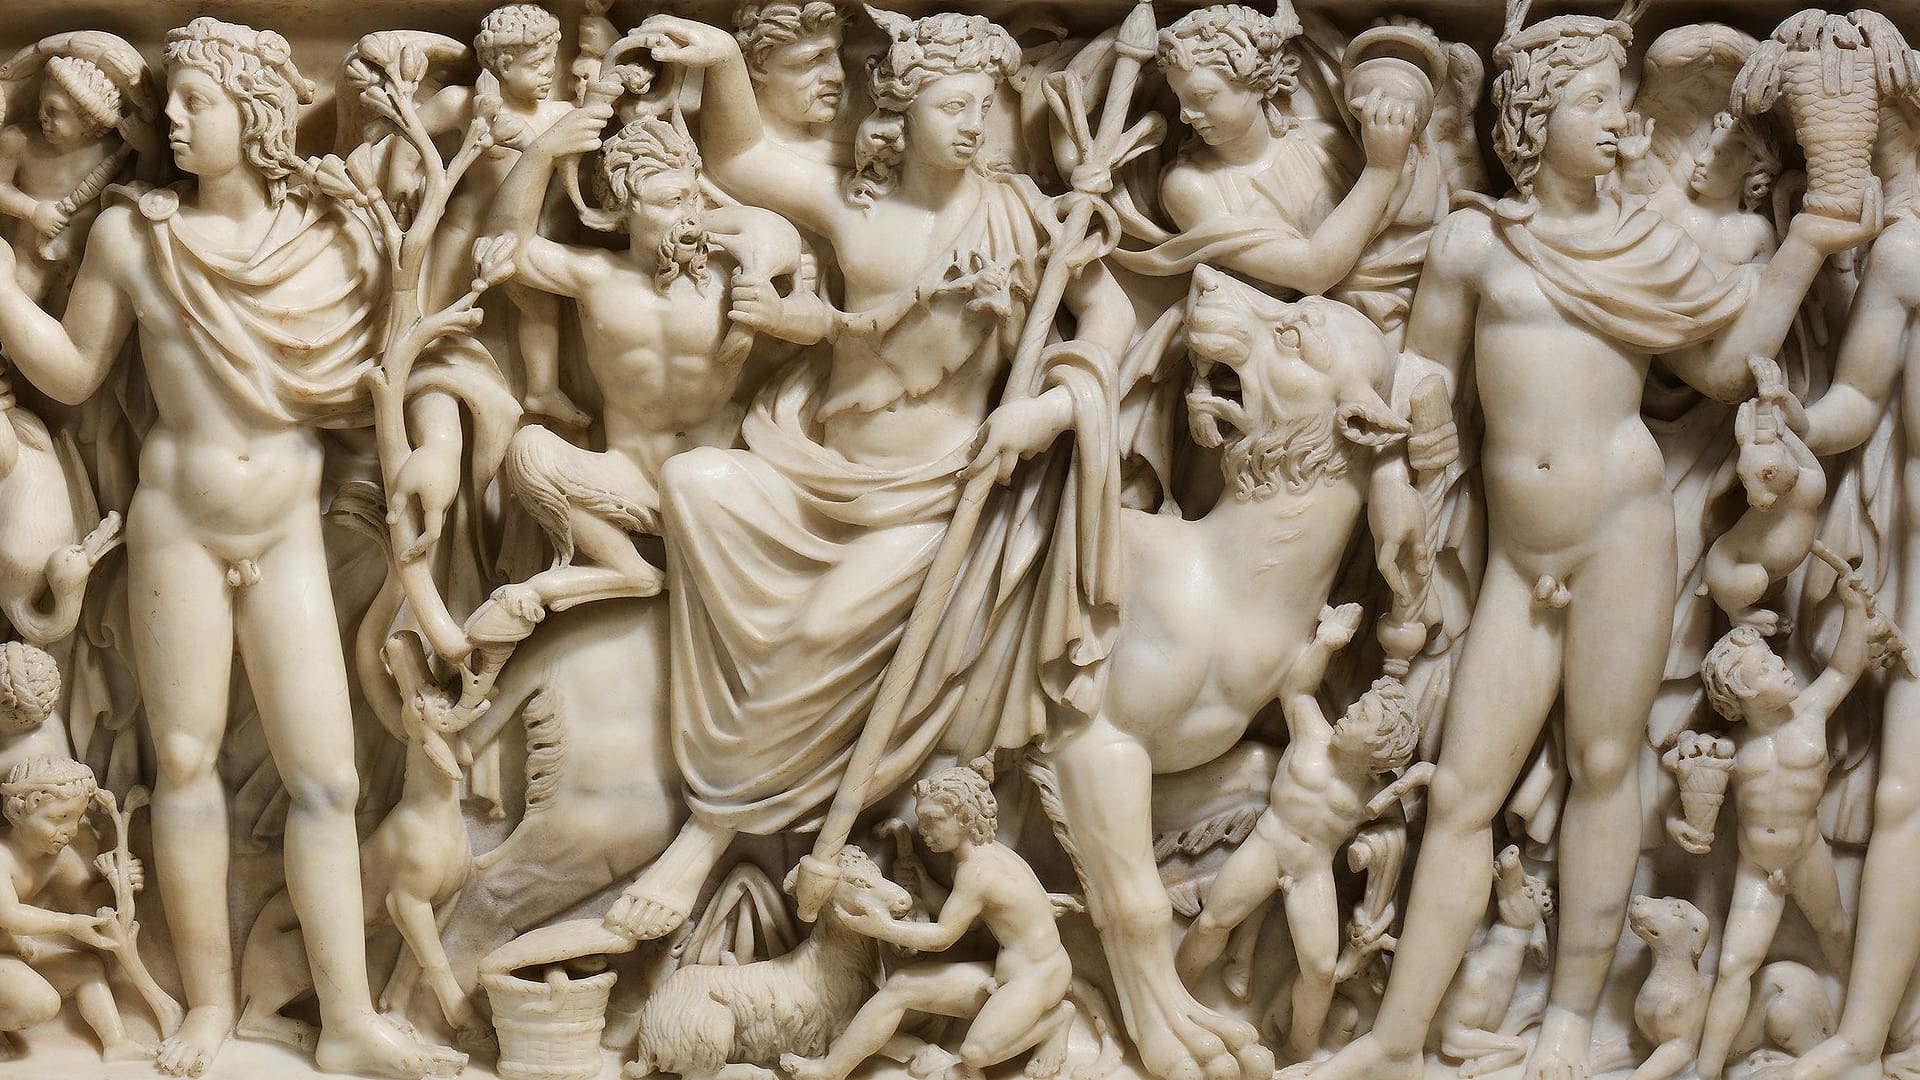 Roman marble sarcophagus with the Triumph of Dionysos and the Seasons; Metropolitan Museum, New York.